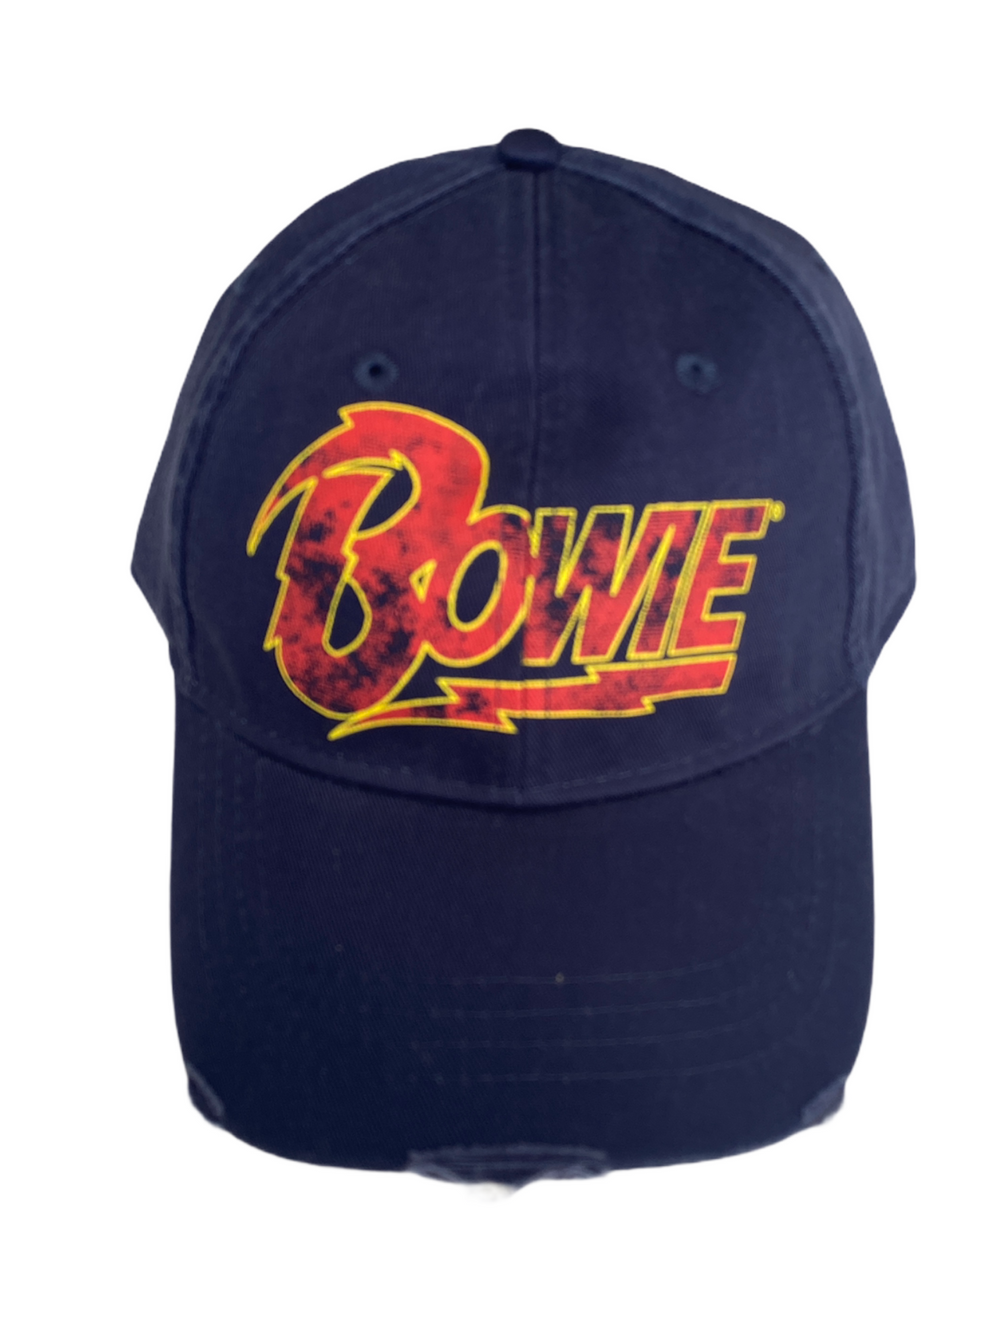 David Bowie Official Embroidered Peak Cap Adjustable Brand New Flash Logo Navy